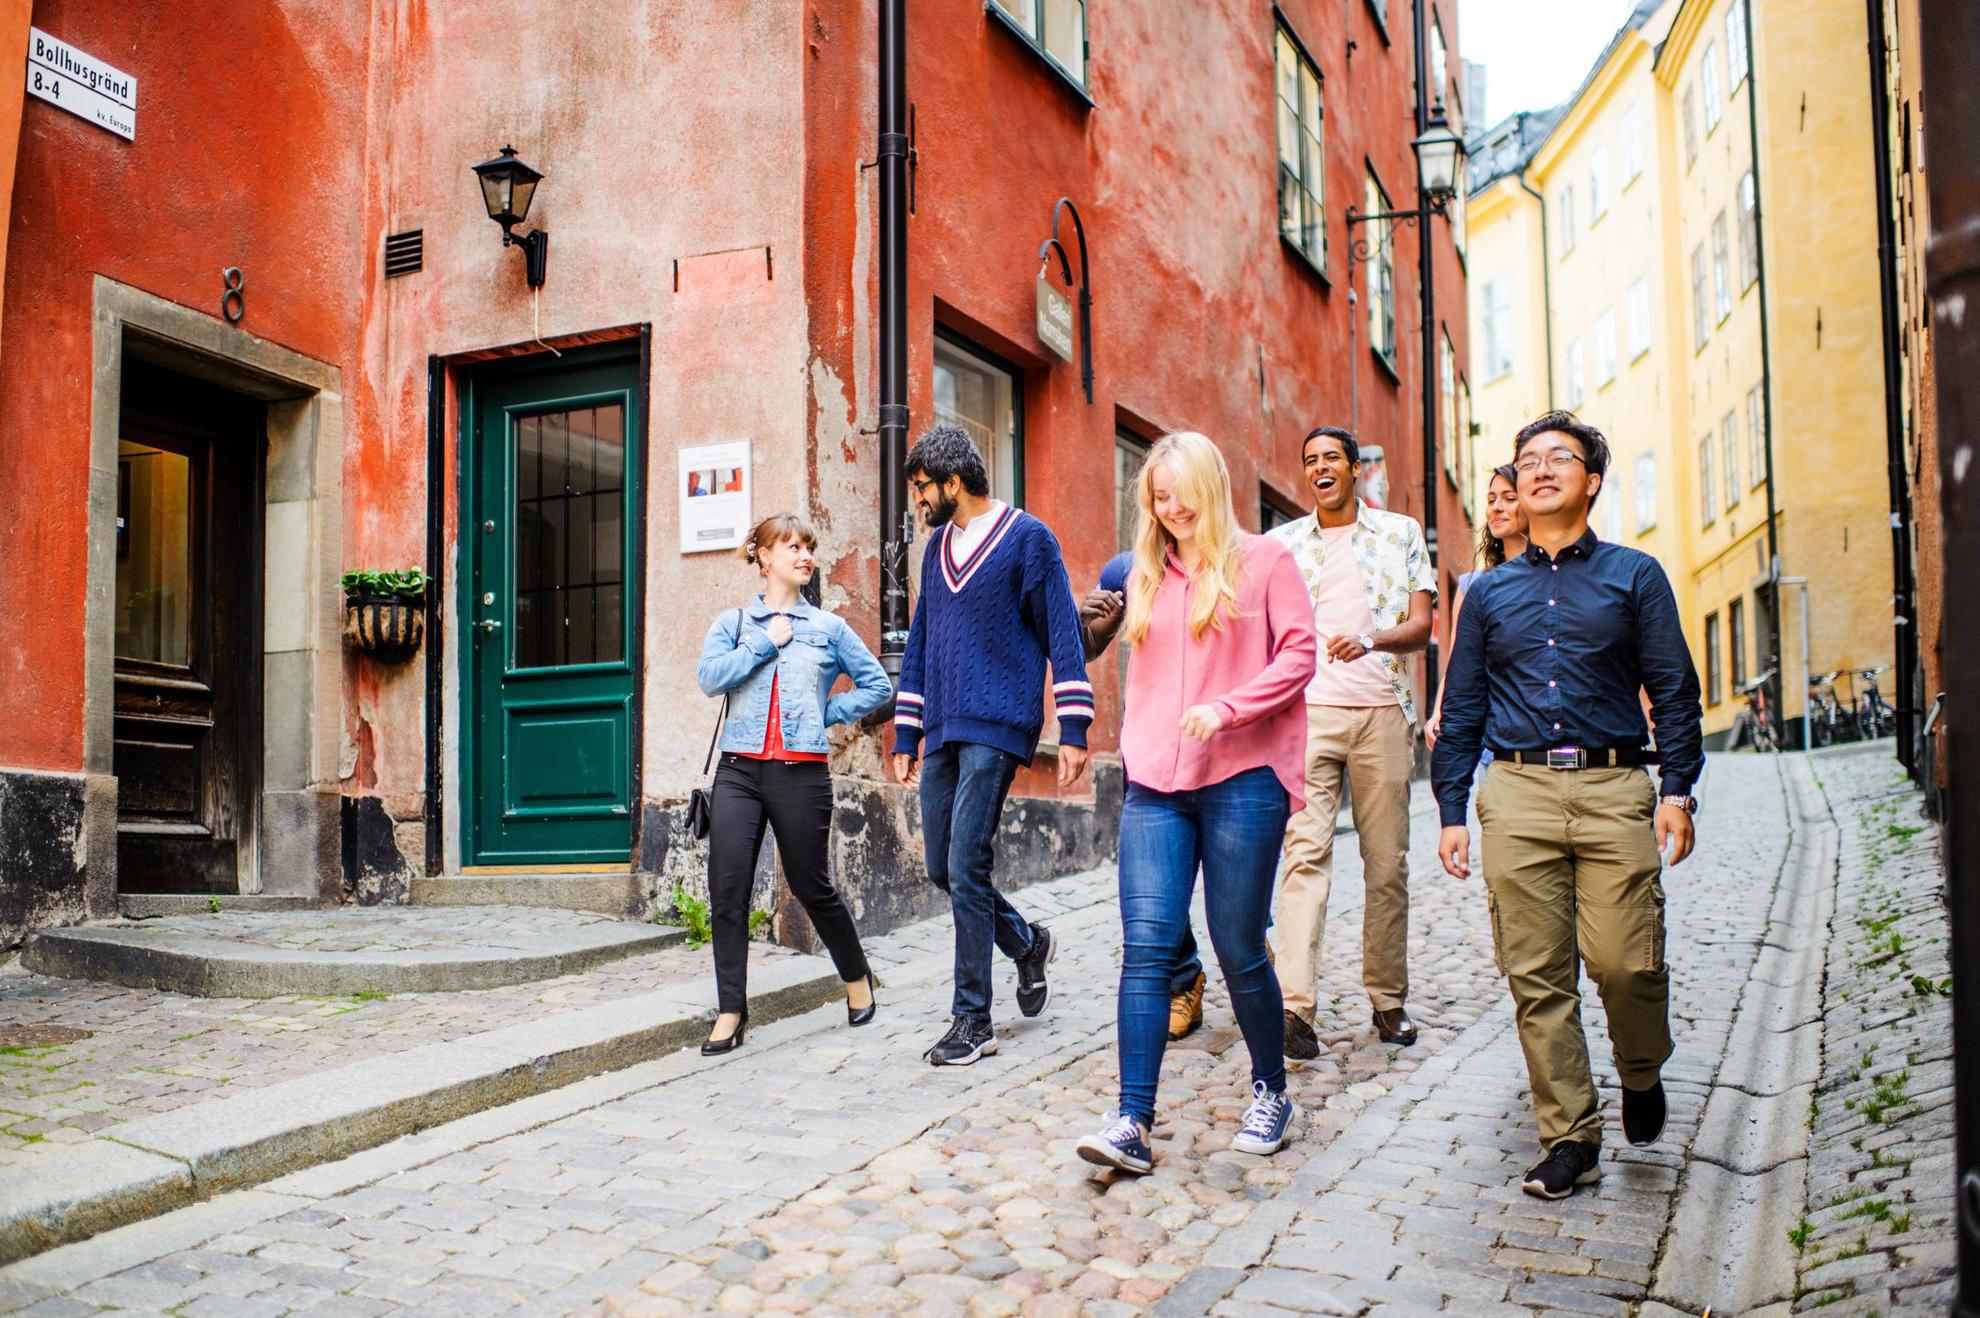 A group of people are walking down a cobbled street in Old Town Stockholm, talking and smiling.